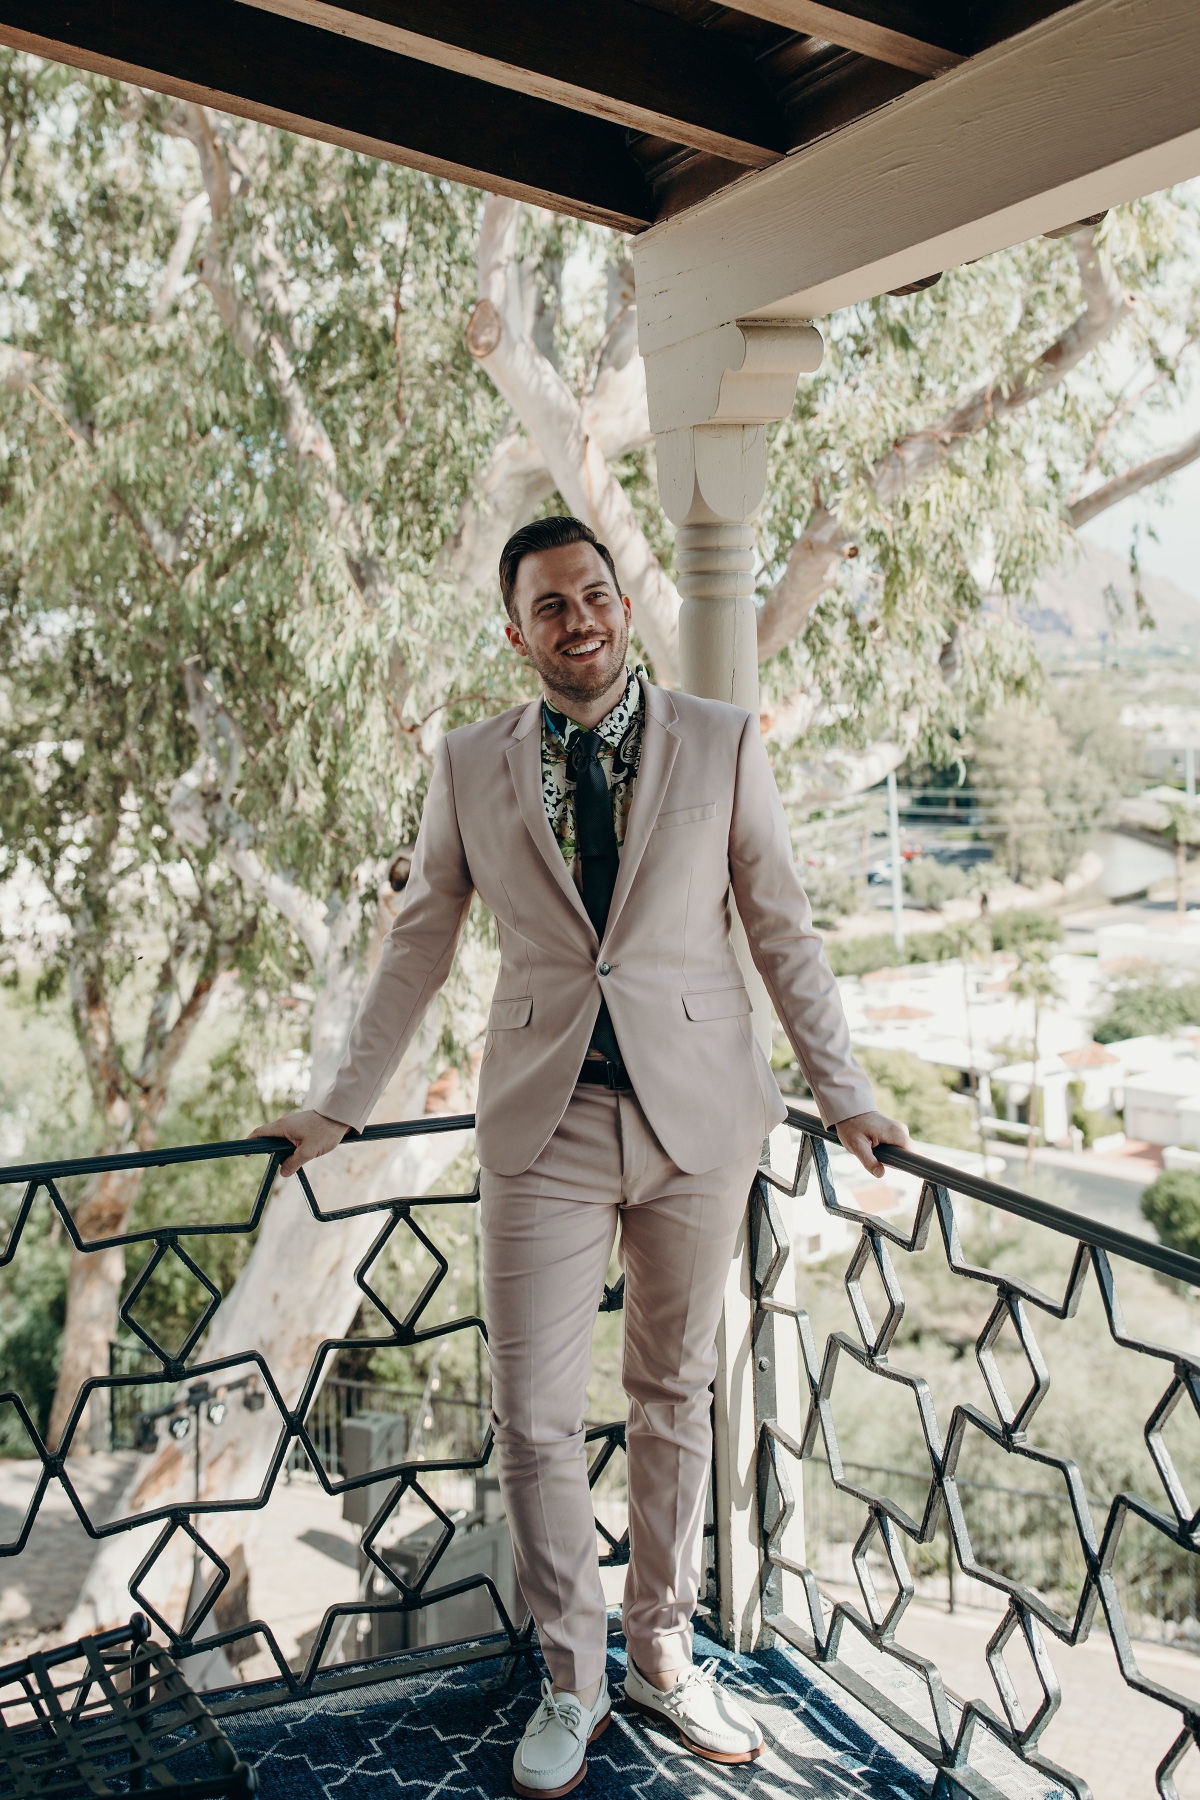 Pale blush suit for the groom